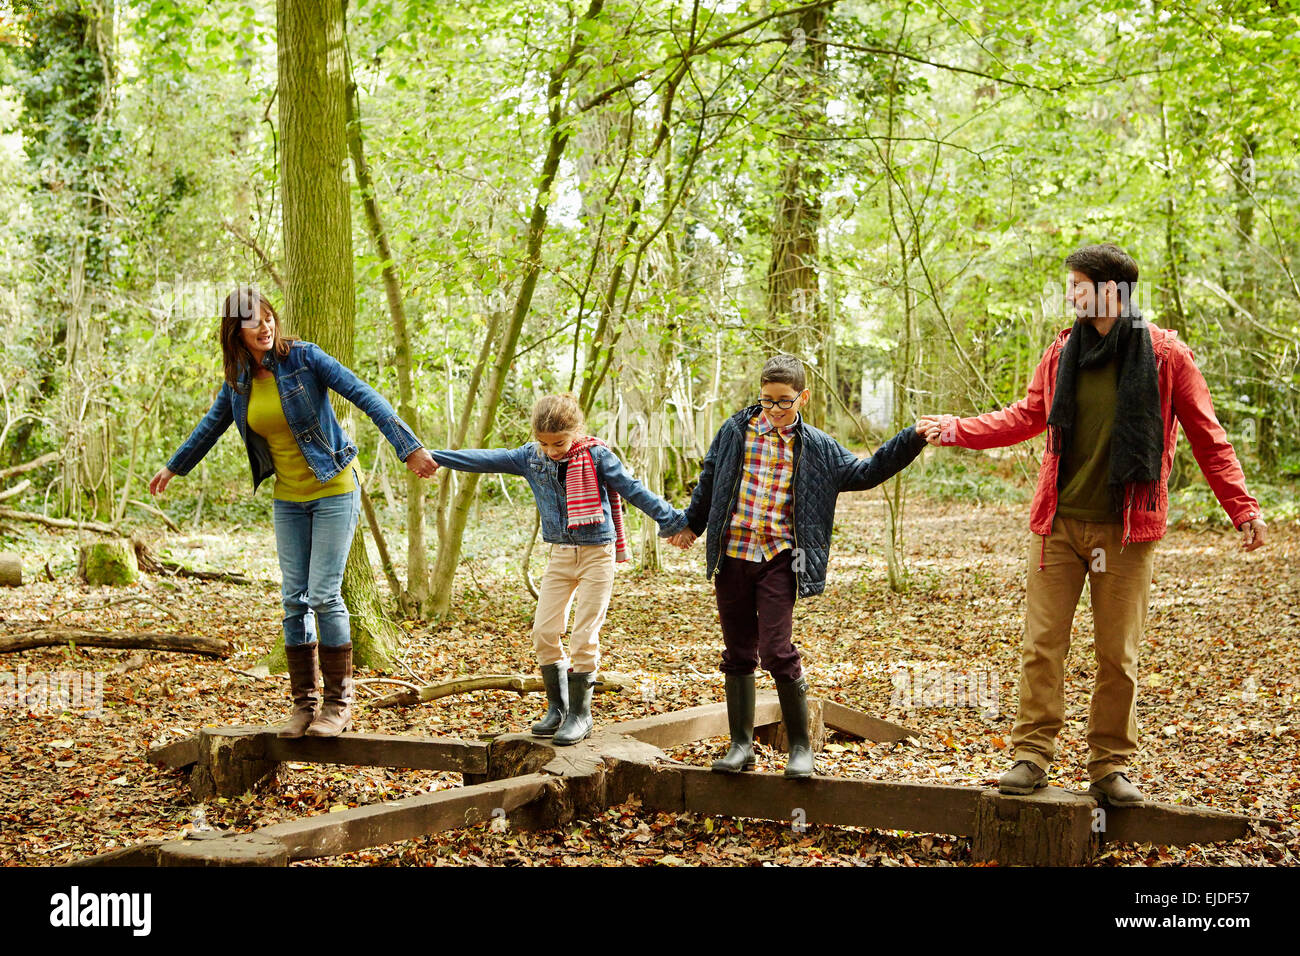 Beech woods in Autumn. A family of four people, two adults and two children. Stock Photo